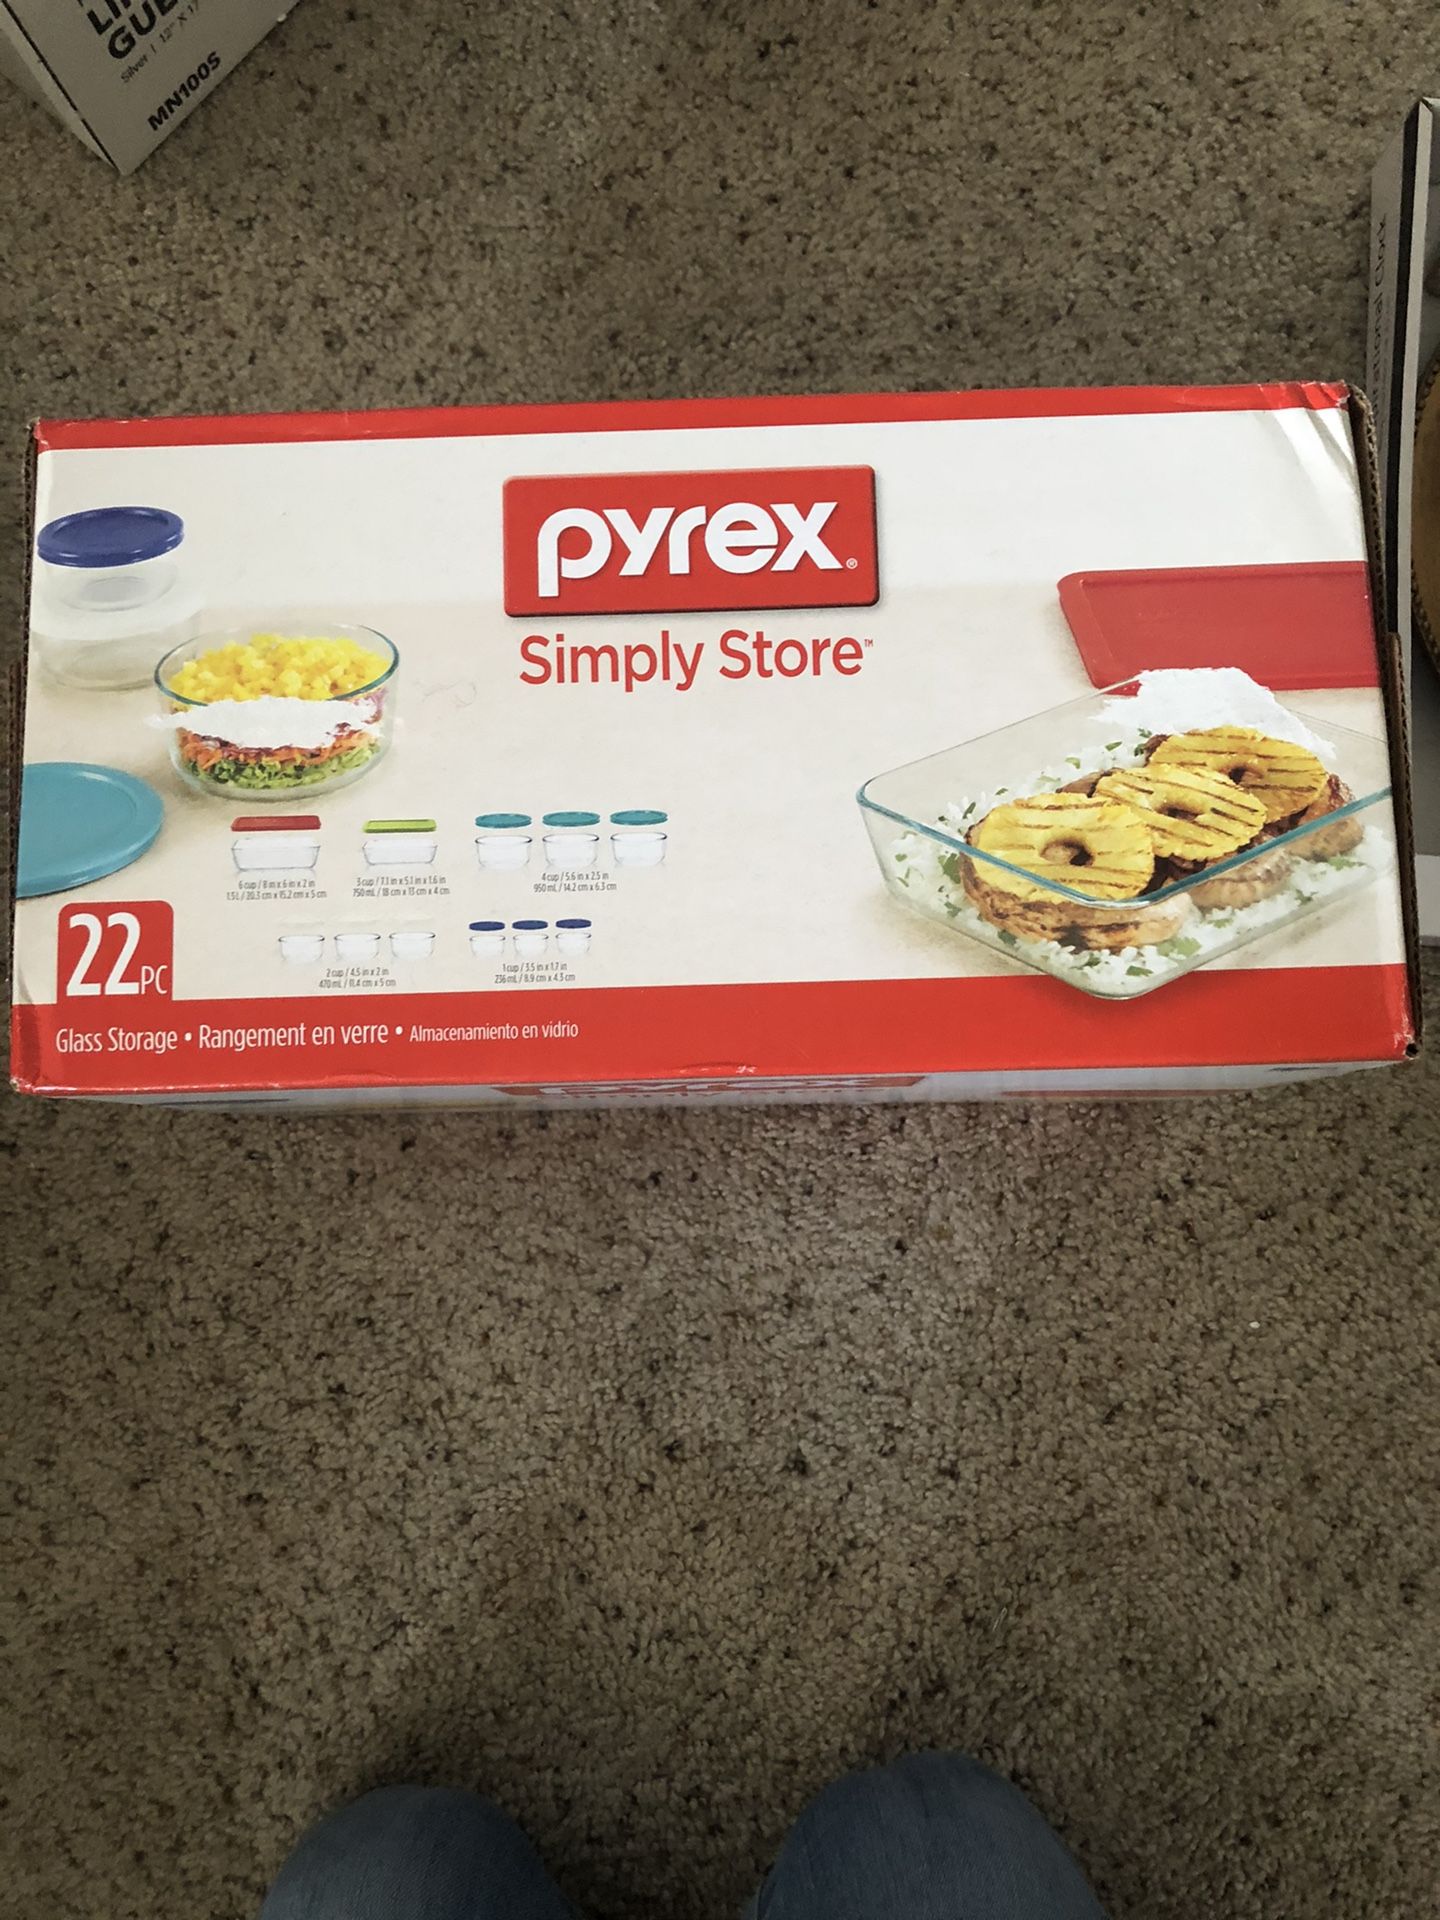 Pyrex containers (22 pc)